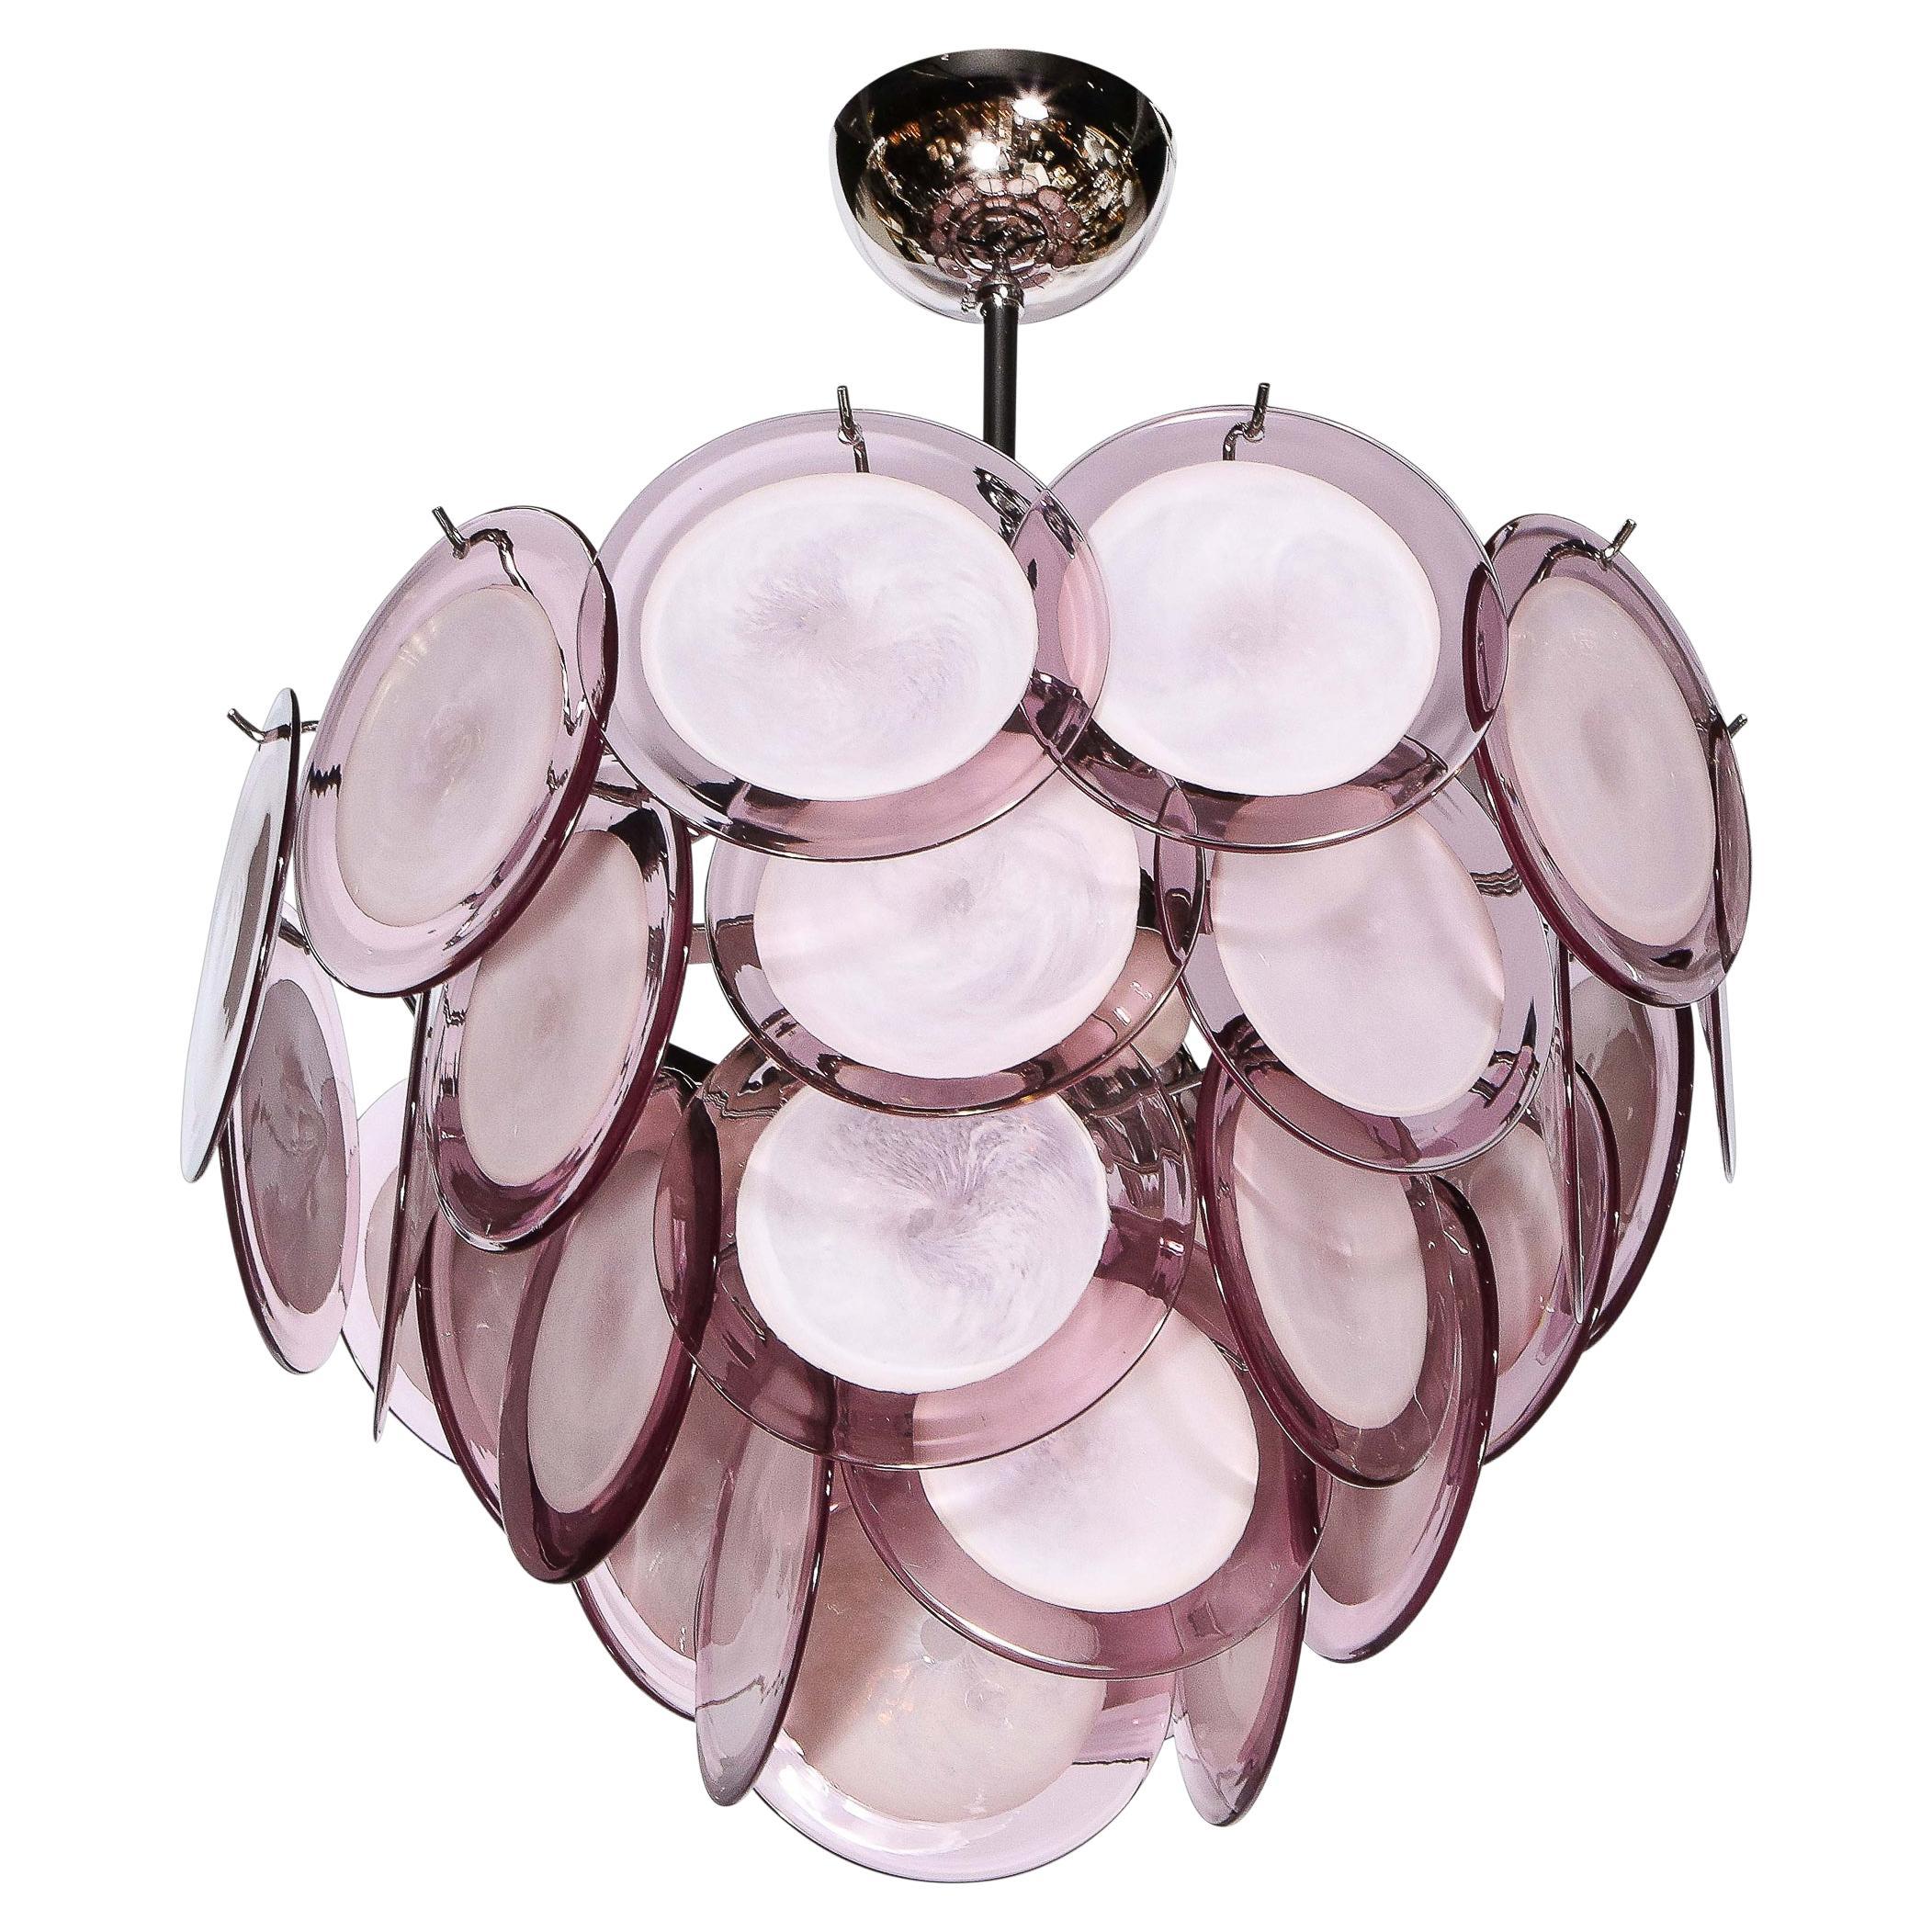 Modernist Four Tier Amethyst Handblown Murano Chandelier with Chrome Fittings